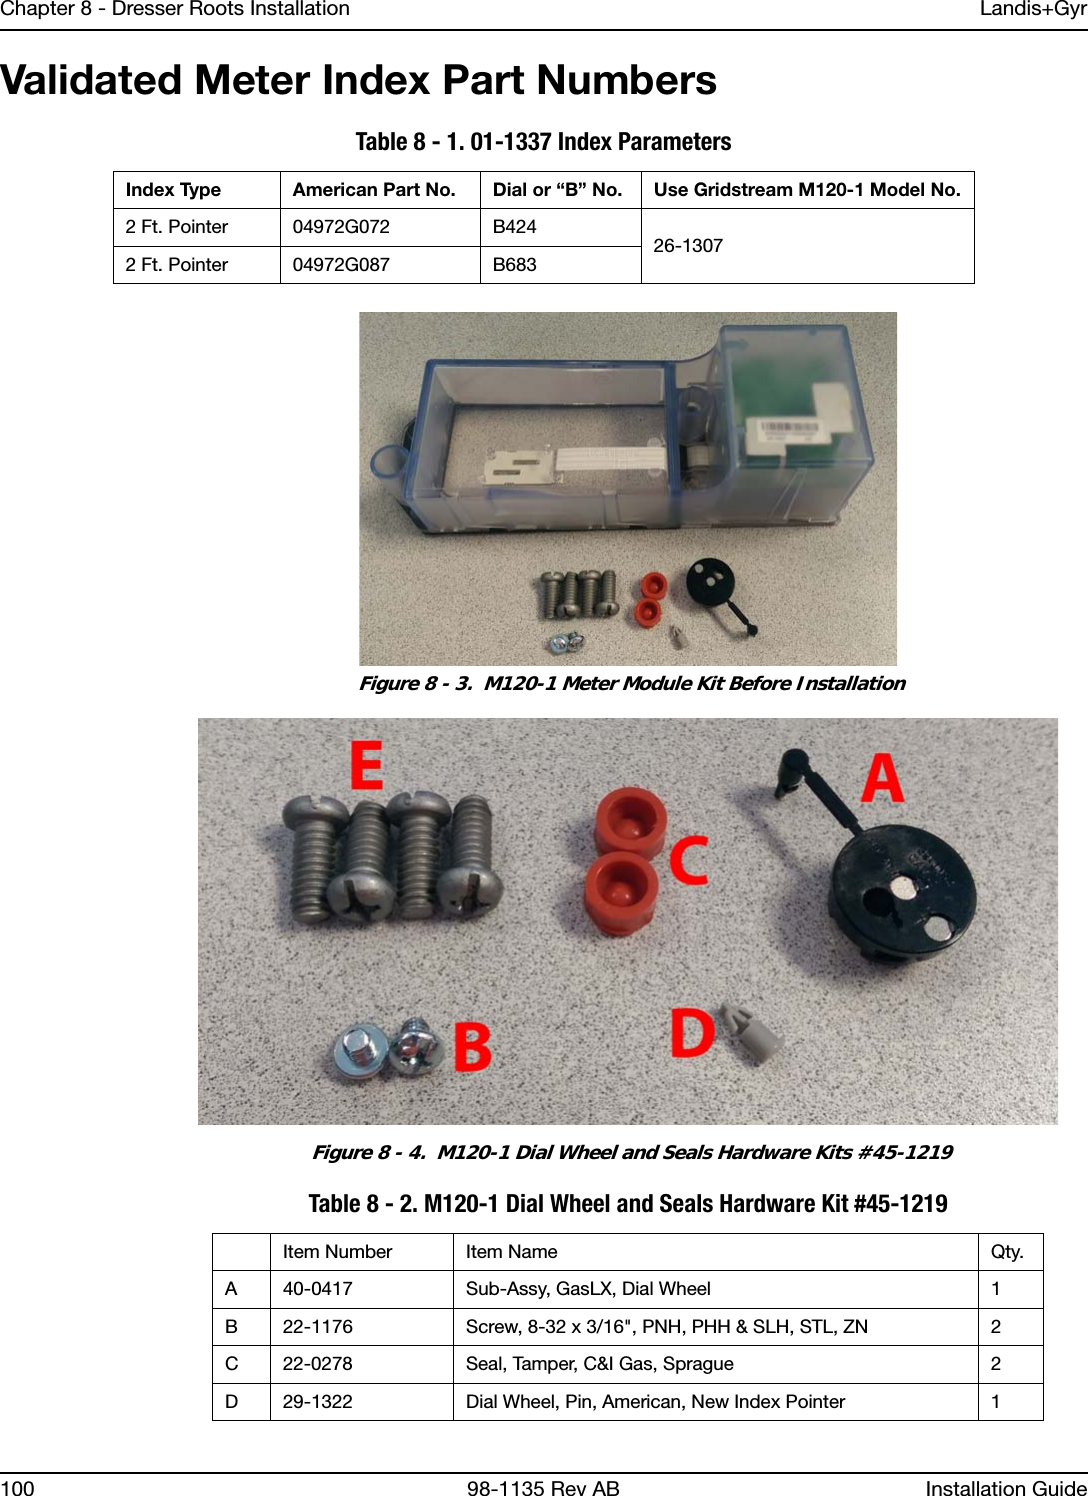 Chapter 8 - Dresser Roots Installation Landis+Gyr100 98-1135 Rev AB Installation GuideValidated Meter Index Part Numbers Figure 8 - 3.  M120-1 Meter Module Kit Before Installation Figure 8 - 4.  M120-1 Dial Wheel and Seals Hardware Kits #45-1219Table 8 - 1. 01-1337 Index ParametersIndex Type American Part No. Dial or “B” No. Use Gridstream M120-1 Model No.2 Ft. Pointer 04972G072 B42426-13072 Ft. Pointer 04972G087 B683Table 8 - 2. M120-1 Dial Wheel and Seals Hardware Kit #45-1219Item Number Item Name Qty.A 40-0417 Sub-Assy, GasLX, Dial Wheel 1B 22-1176 Screw, 8-32 x 3/16&quot;, PNH, PHH &amp; SLH, STL, ZN 2C 22-0278 Seal, Tamper, C&amp;I Gas, Sprague 2D 29-1322 Dial Wheel, Pin, American, New Index Pointer 1